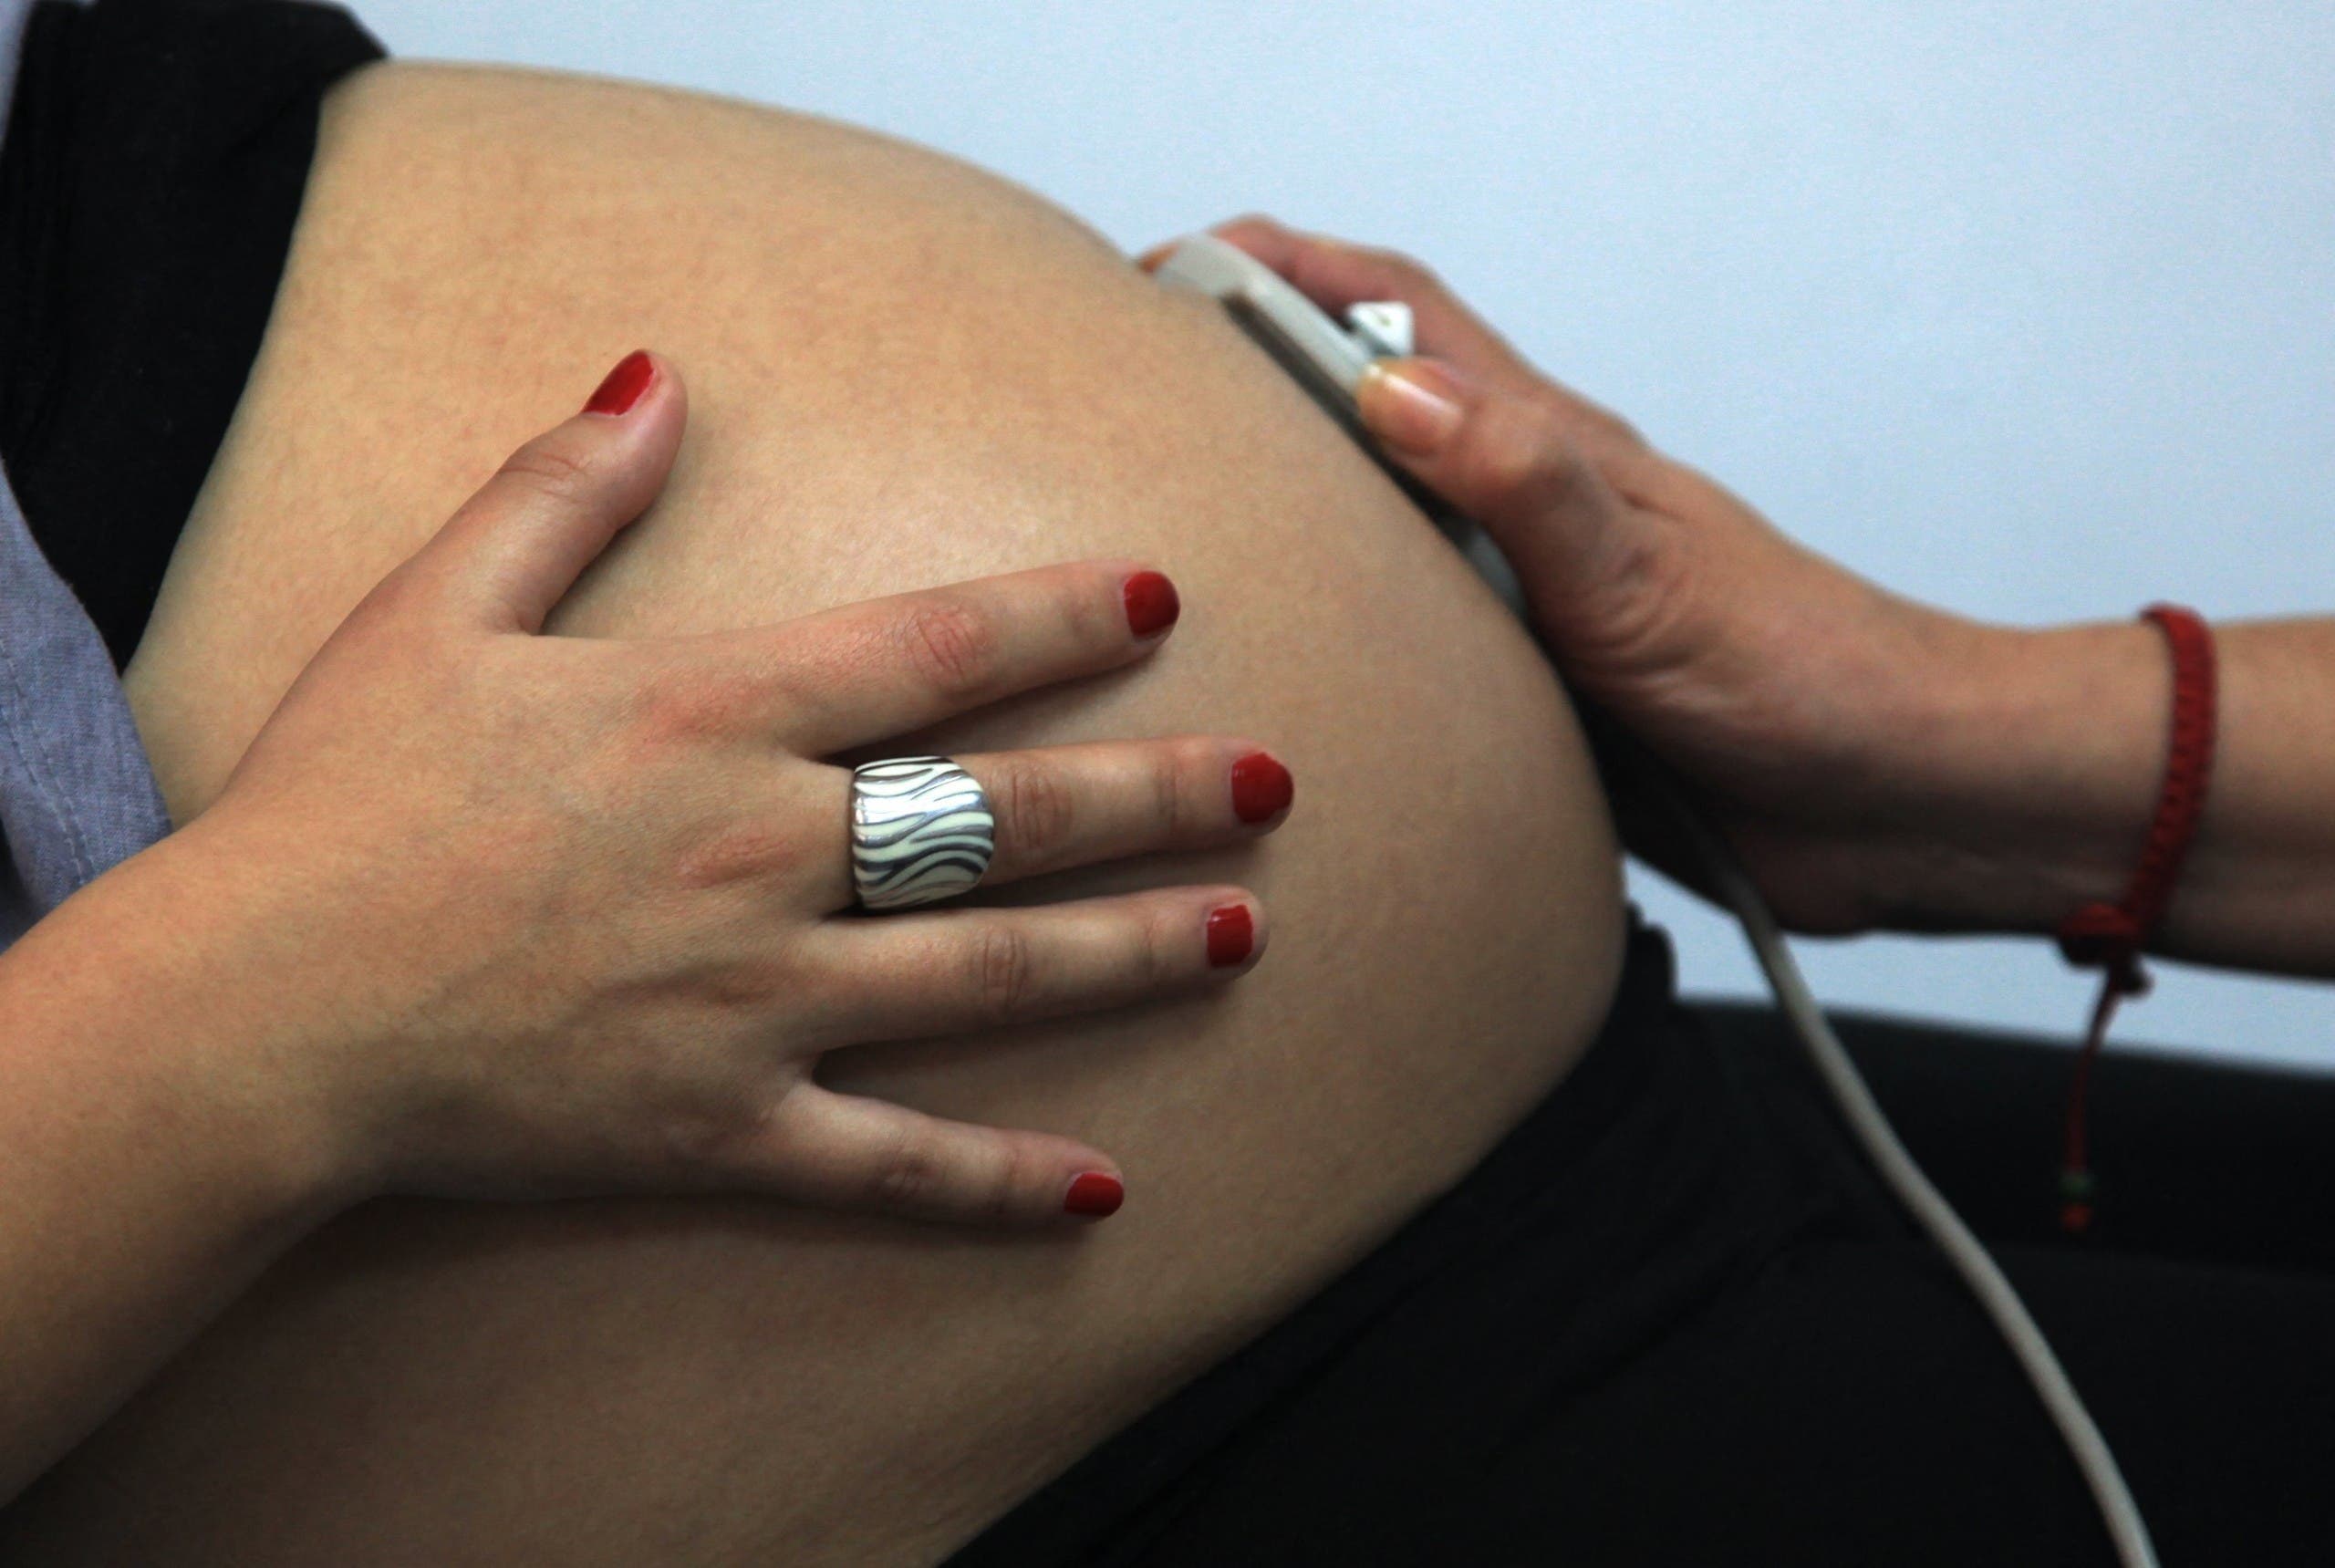 Rayen Luna Solar, 27, 33-week pregnant, is seen by a midwife in a routine checkup. (File photo: AFP)